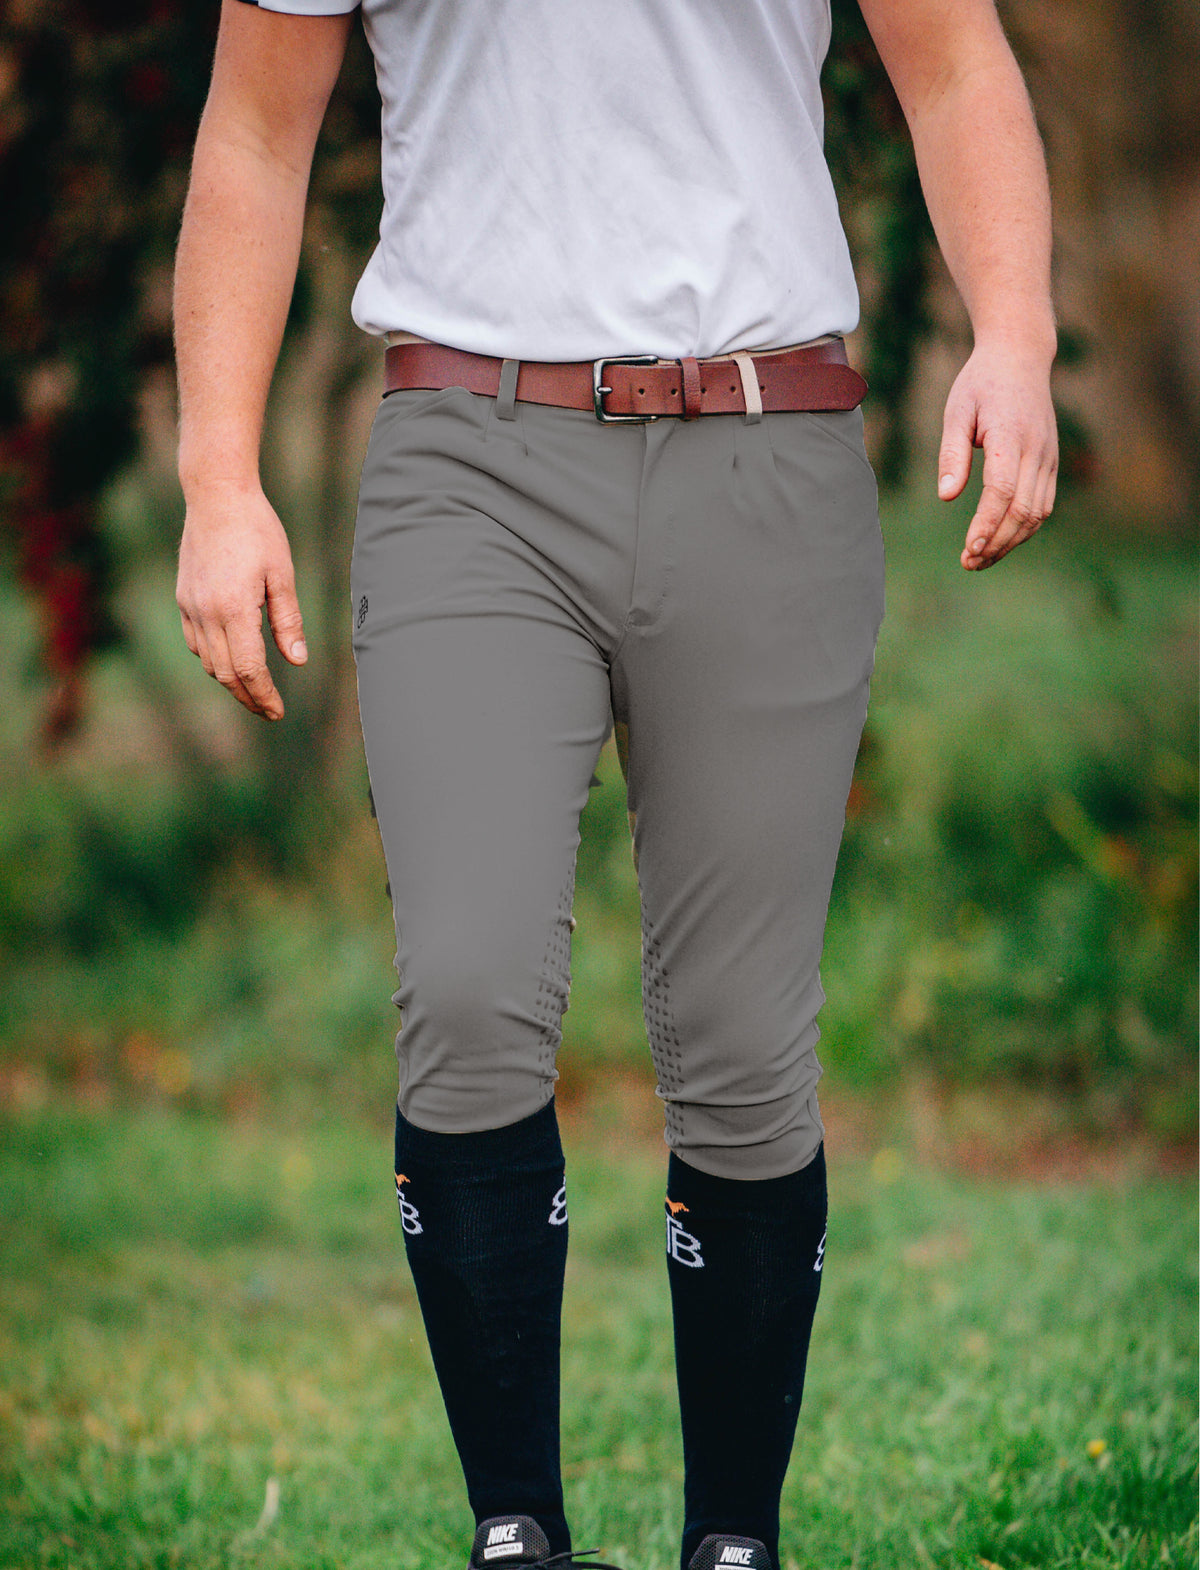 MEN'S PLEAT FRONT BAMBOO BREECH IN GREY AND NAVY